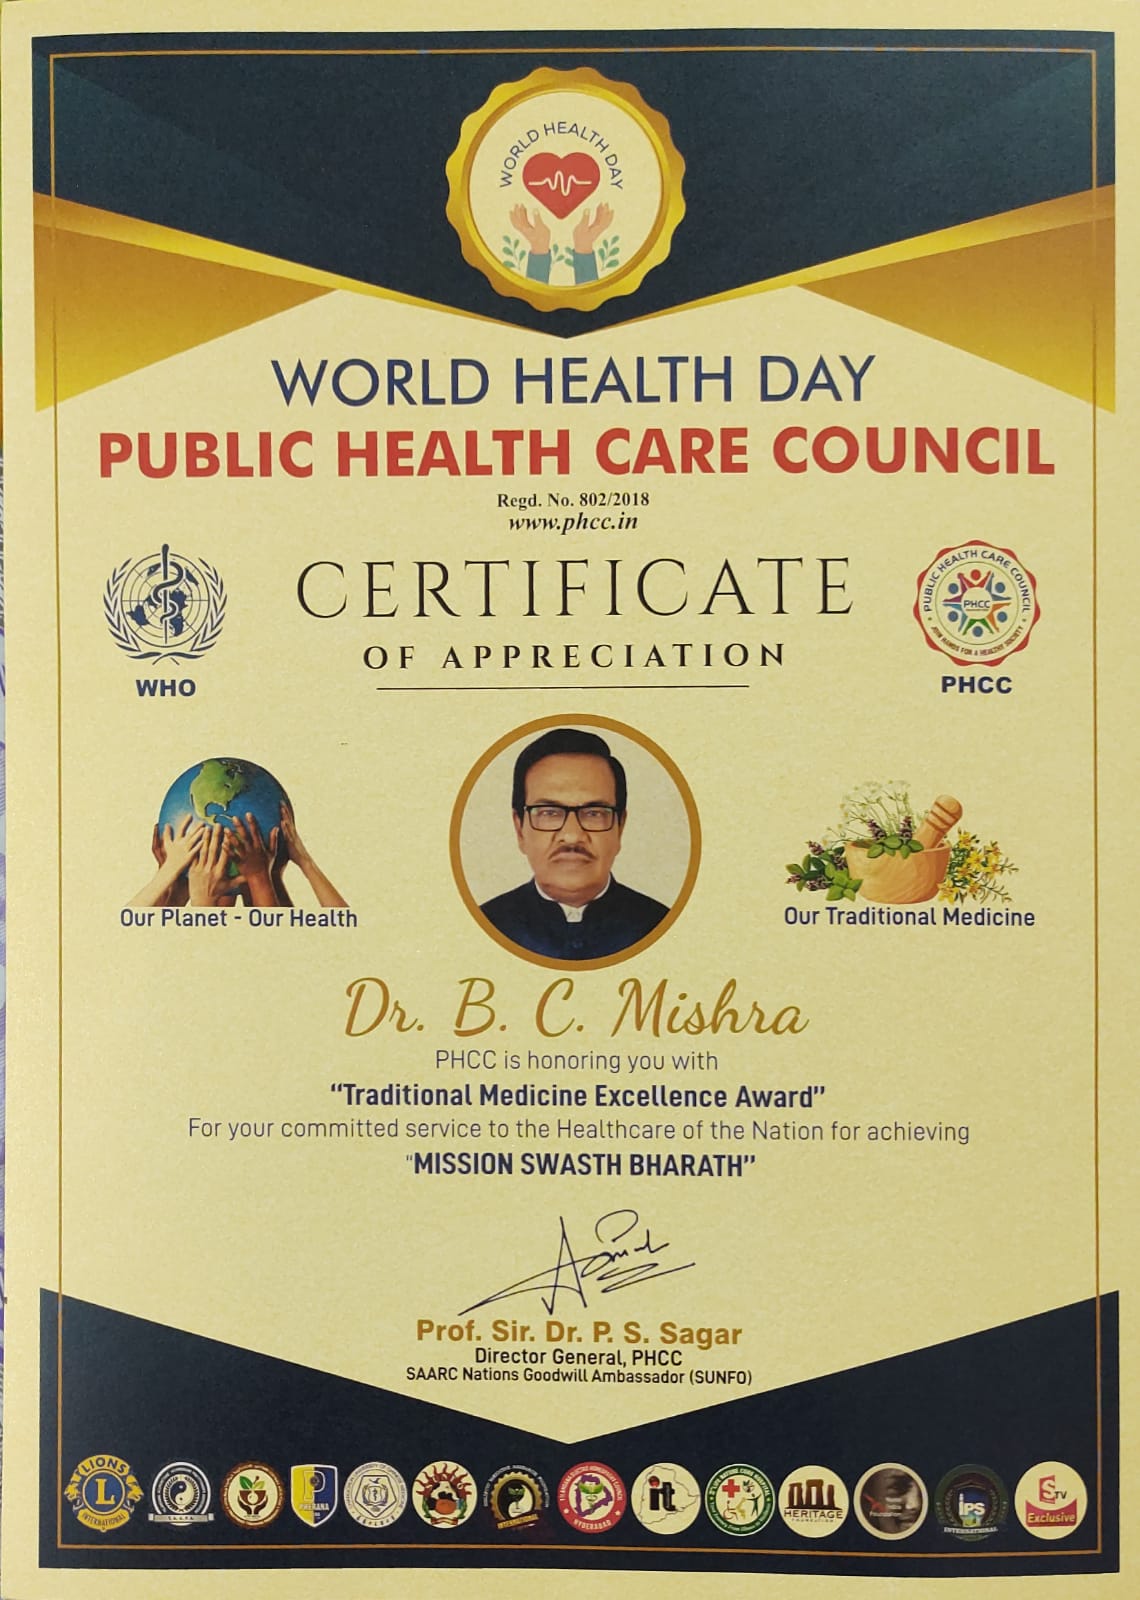 traditional medicine excellence award given to B.C. Mishra - Nizamabad